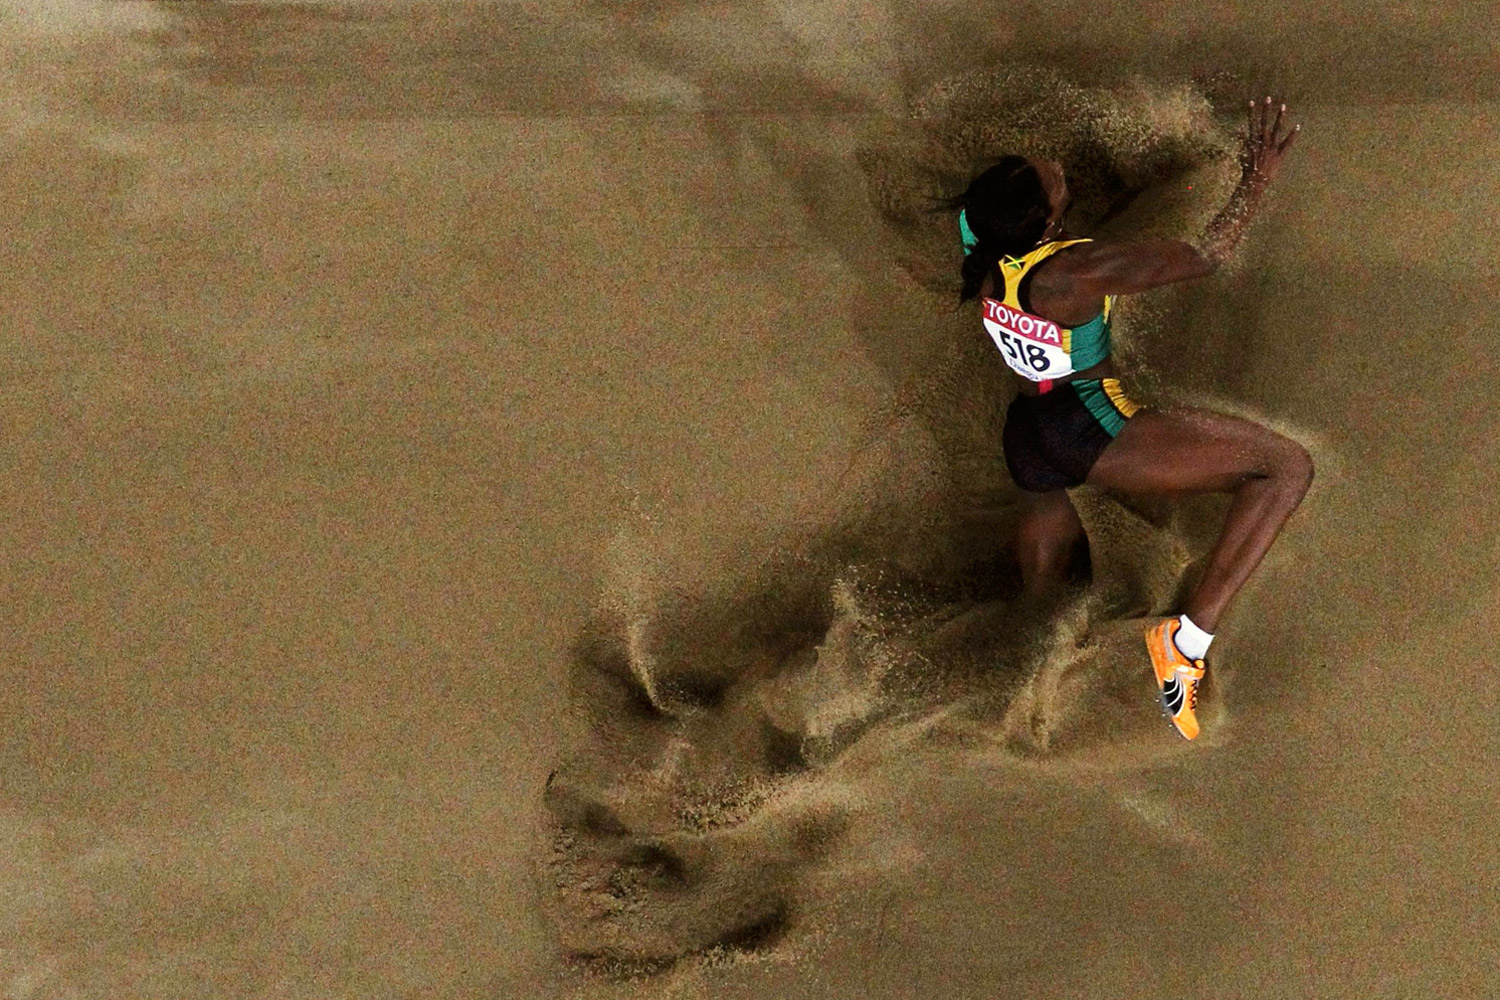 Jovanee Jarrett of Jamaica competes during the women's long jump qualifying event at the IAAF World Athletics Championships in Daegu, South Korea, August 27, 2011.